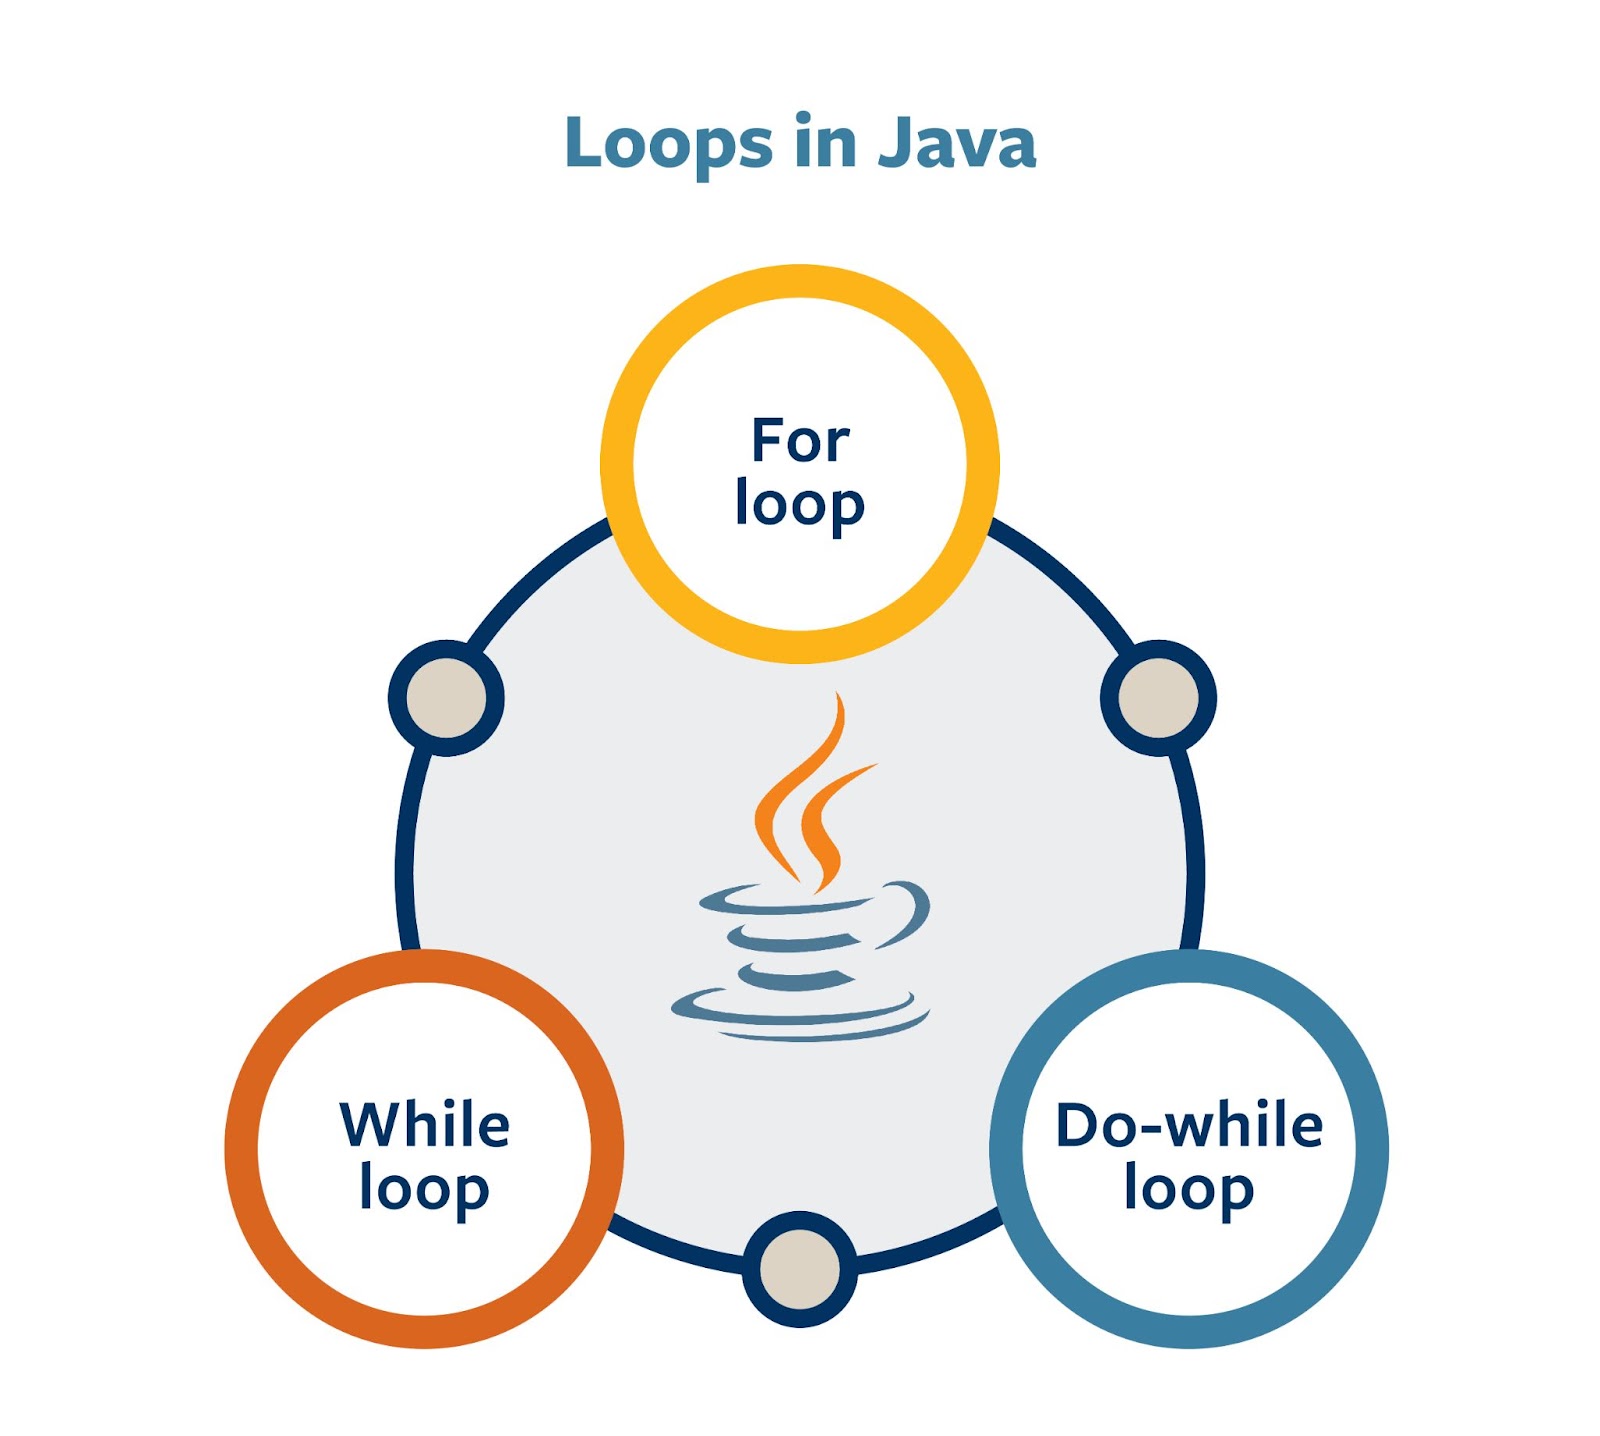 An image highlighting the 3 main loops in Java.